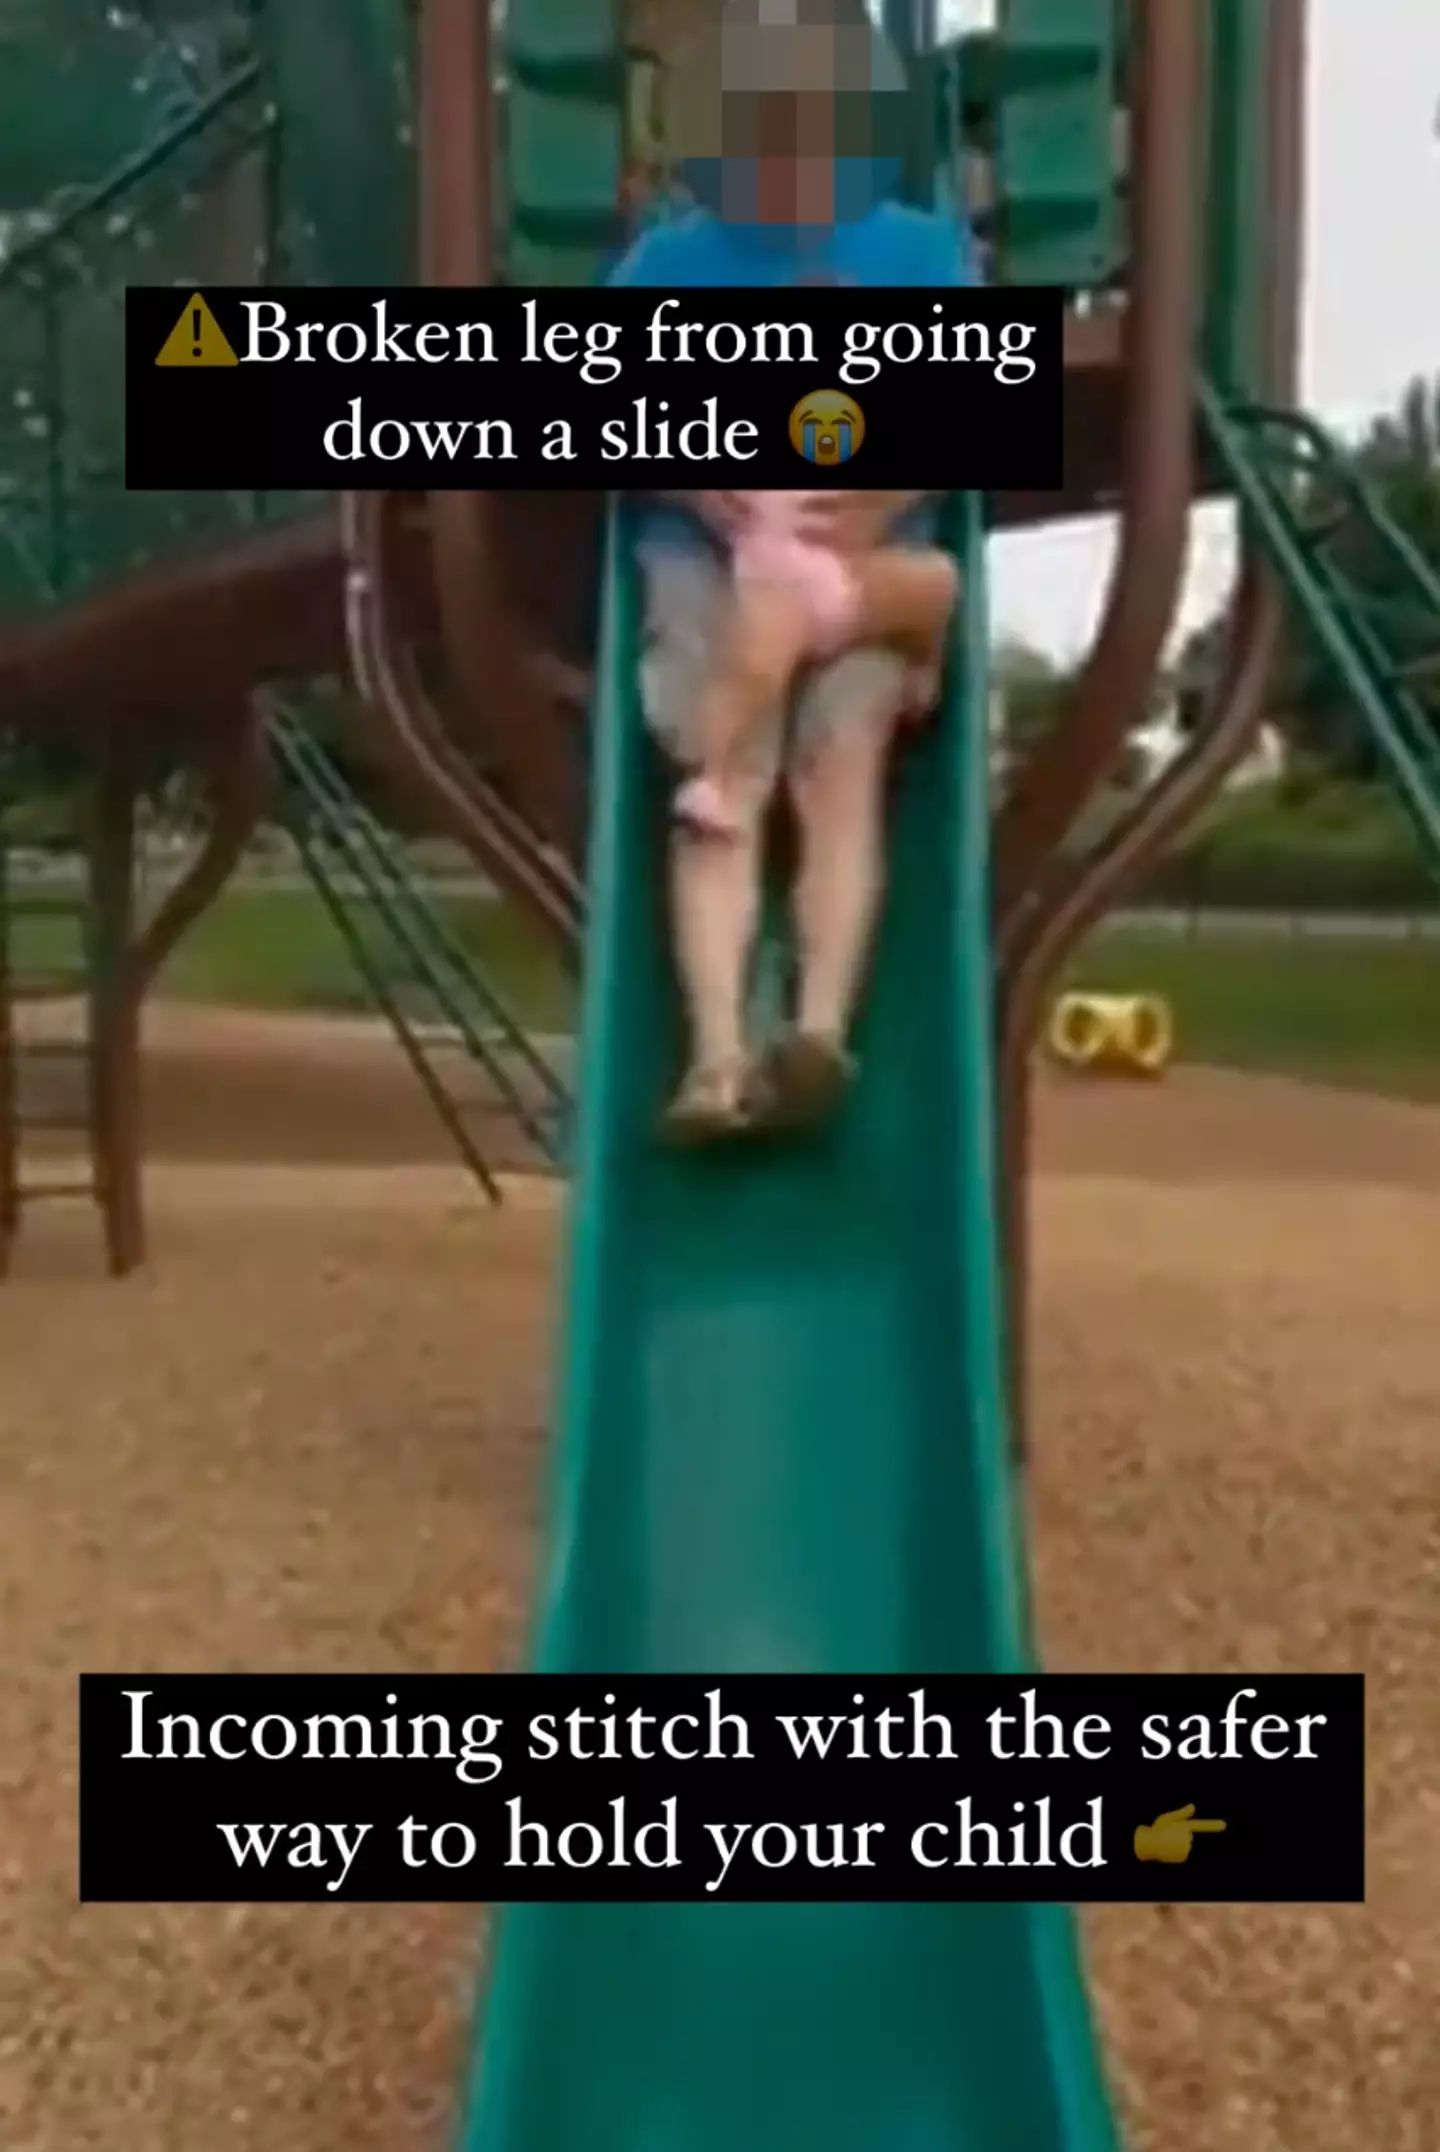 The shocking video shows the little girl's leg get caught while going down the slide.